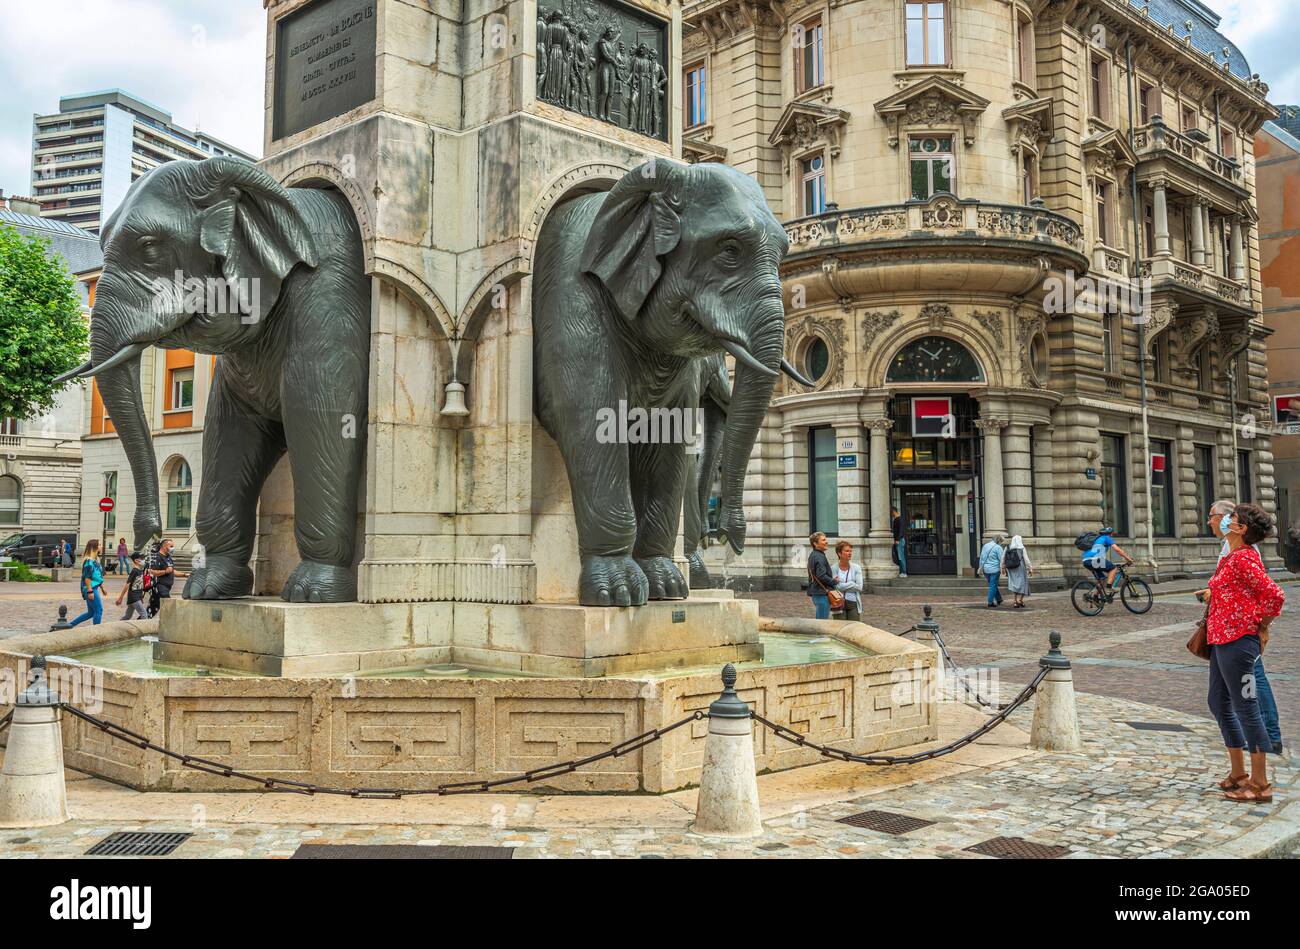 Fountain of the Elephants, memorial fountain from 1838, in the square of the Elephants in Chambery. Chambery, Auvergne-Rhône-Alpes region, France Stock Photo